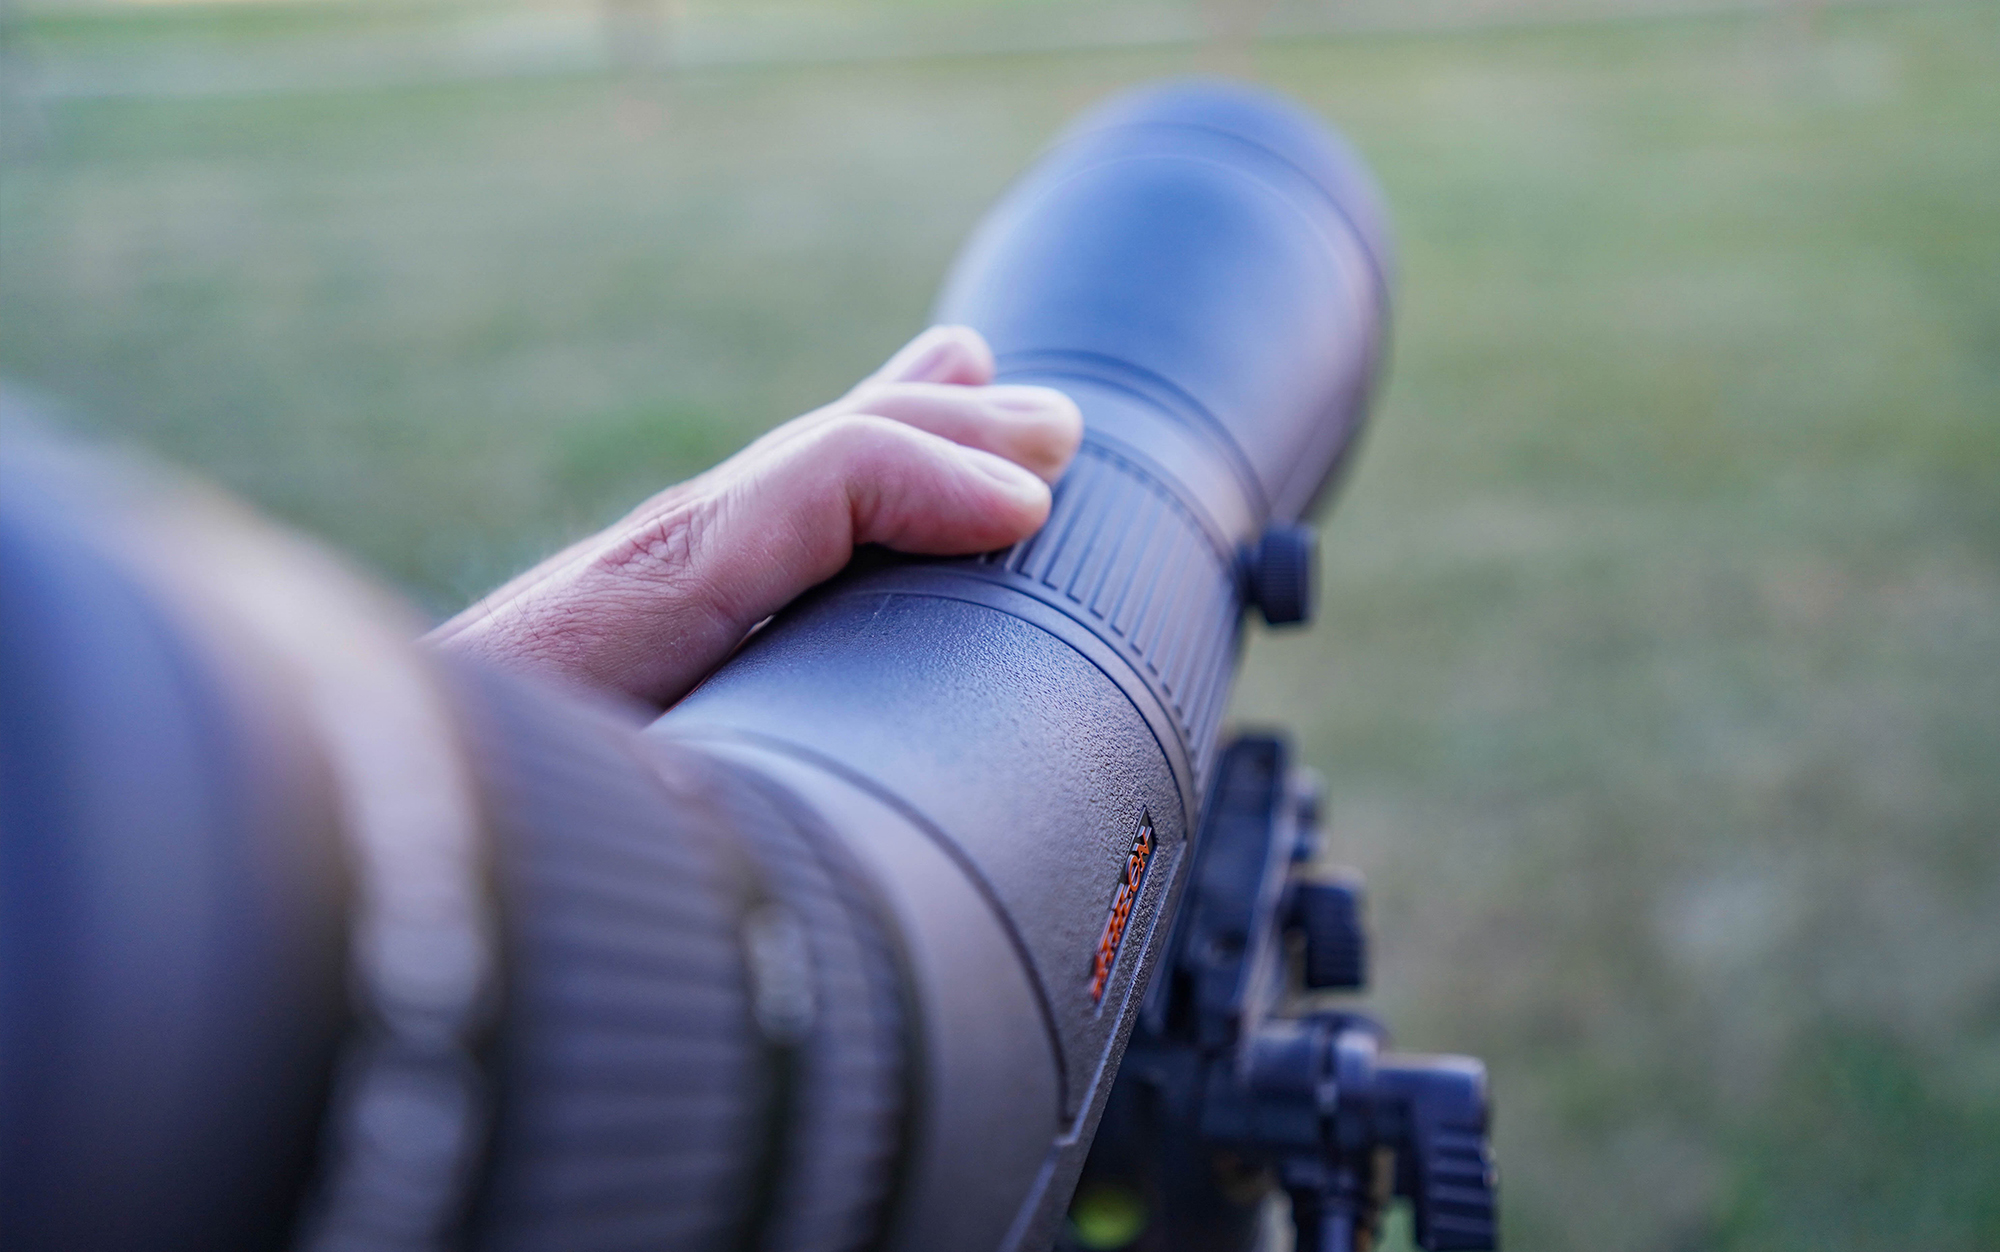 We tested the Athlon spotting scope.